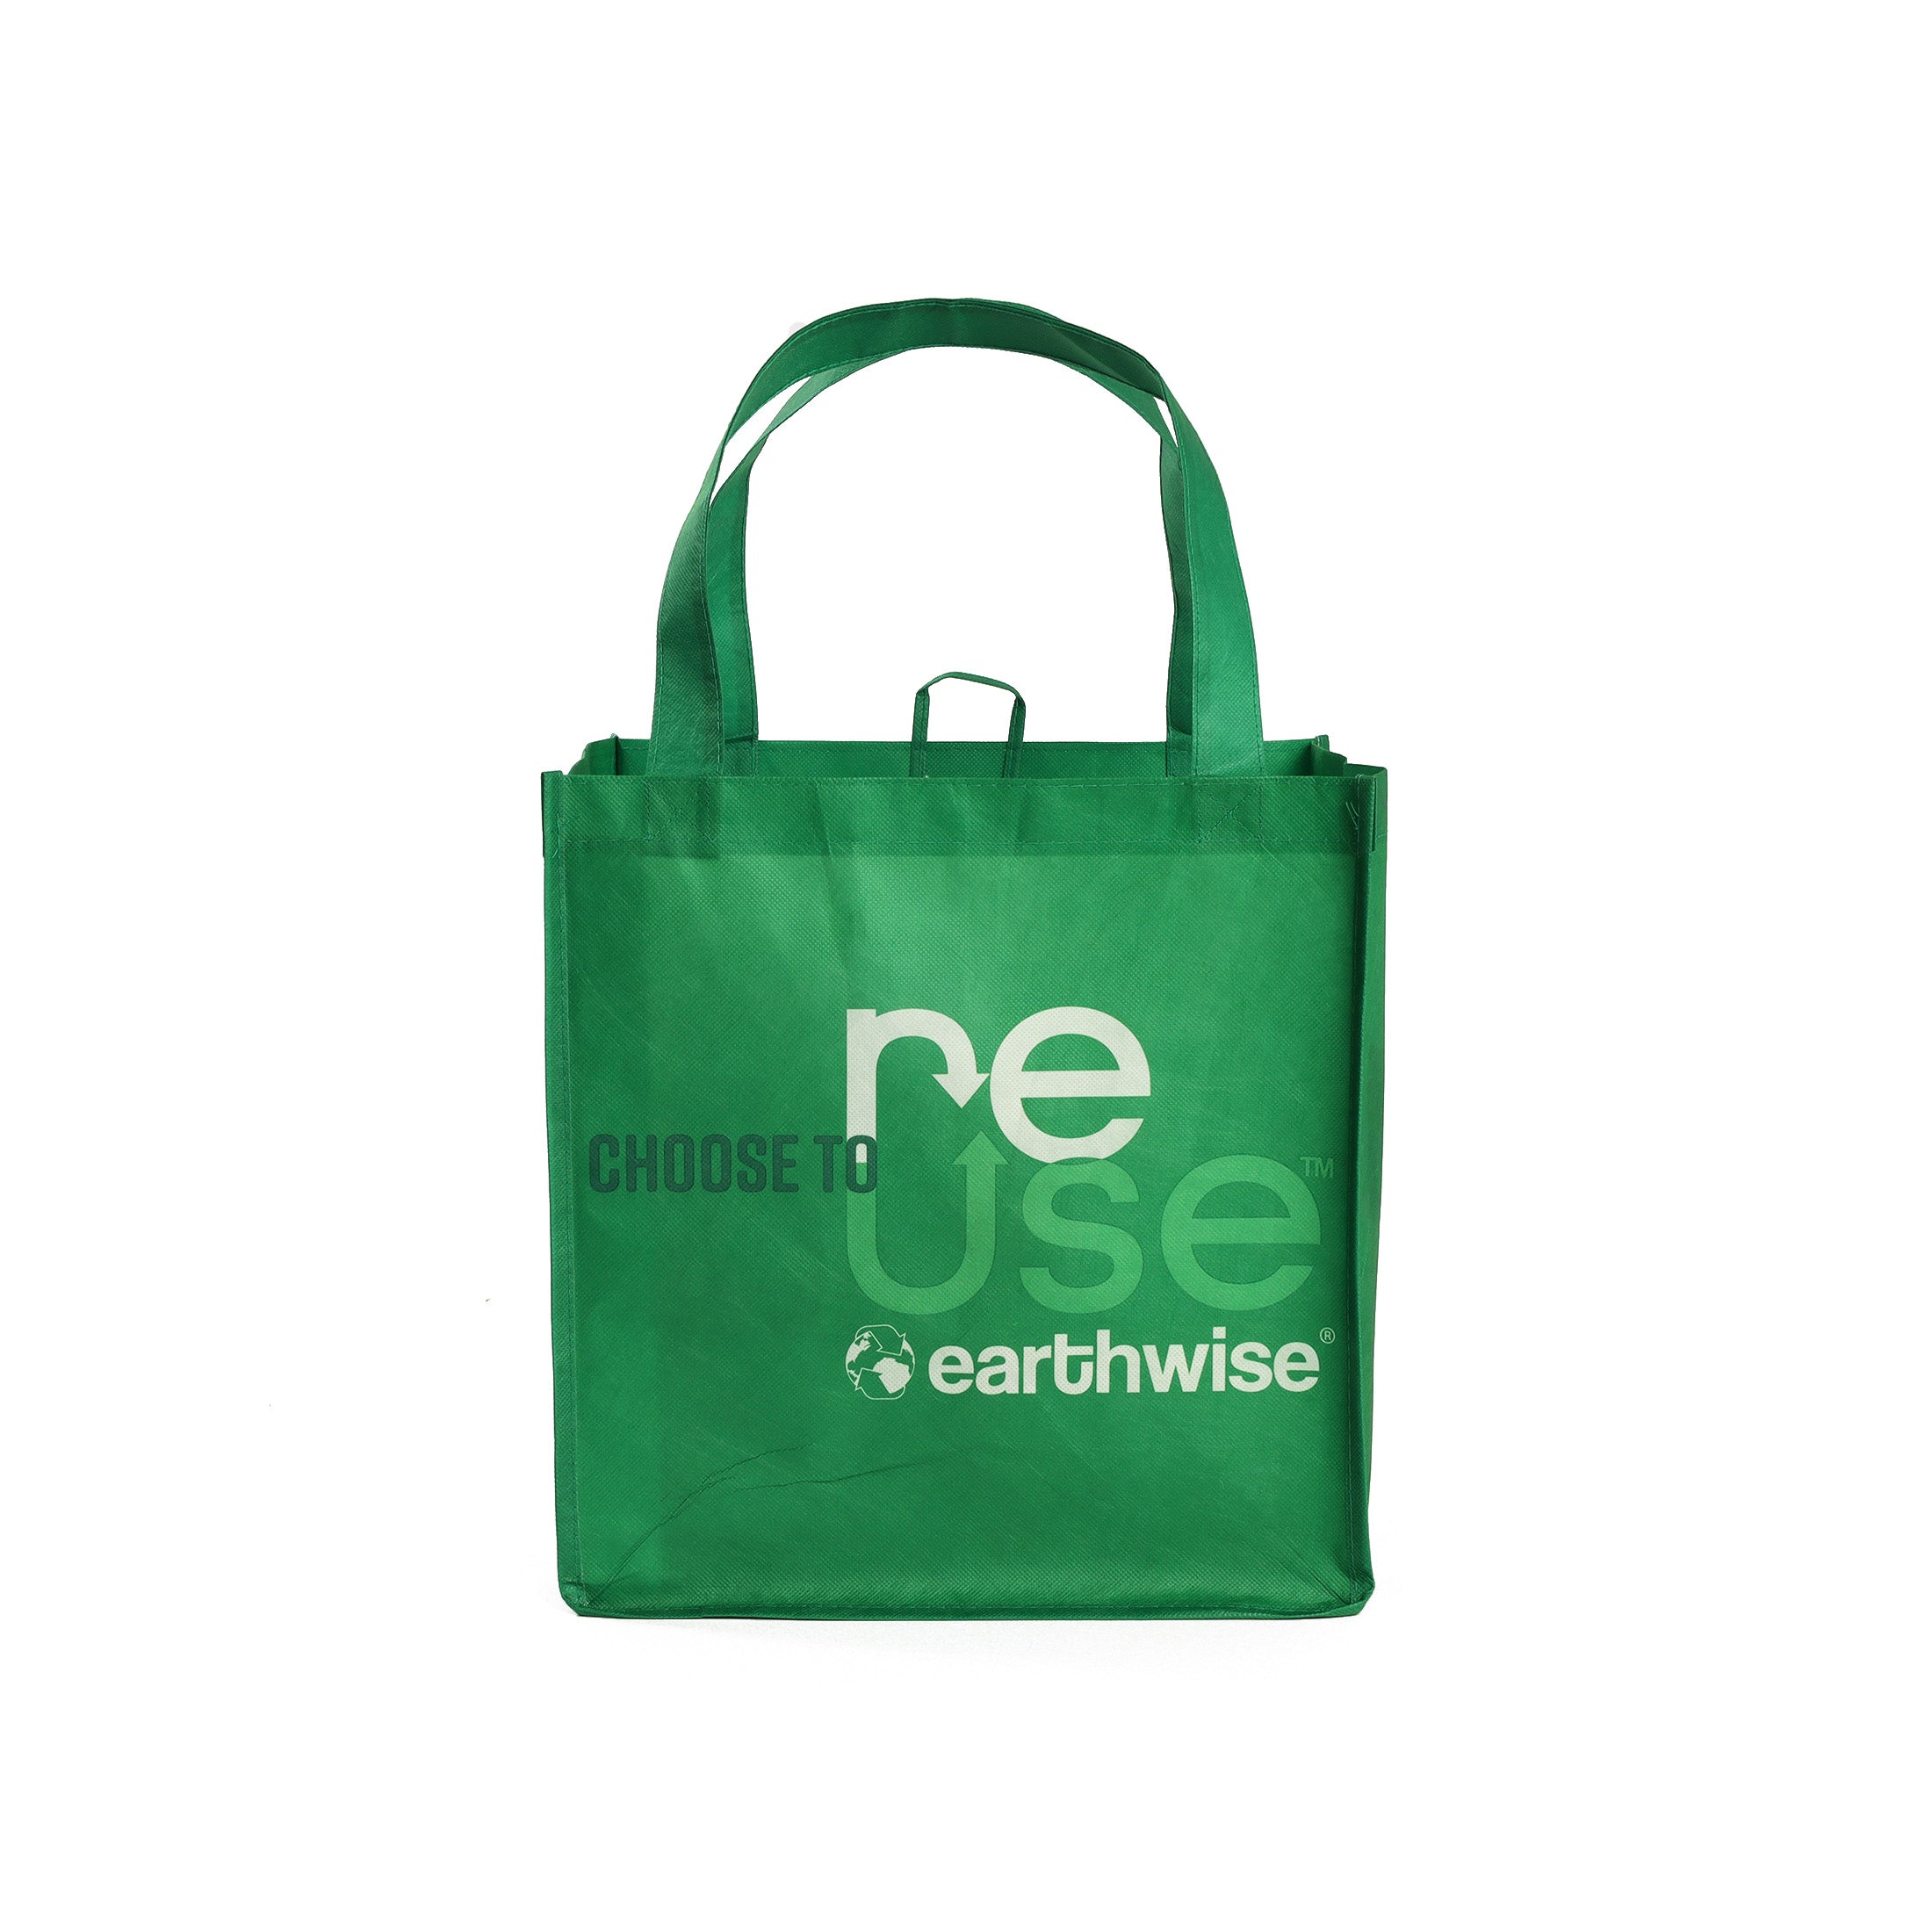 PP Woven and Non-Woven Reusable Bags: What's the Difference?